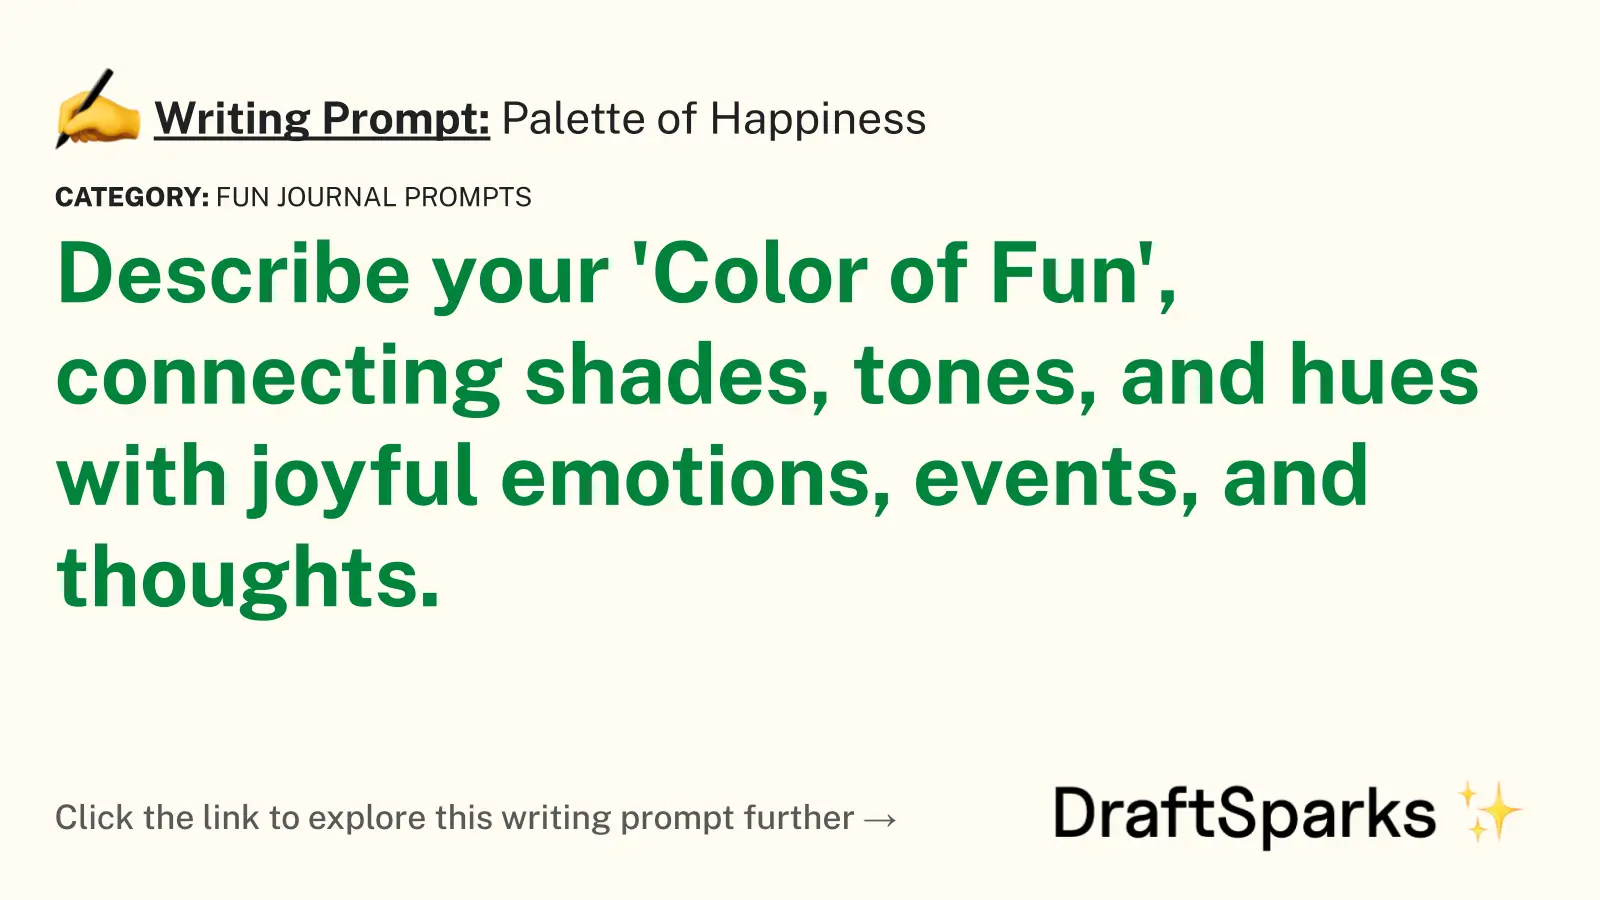 Palette of Happiness